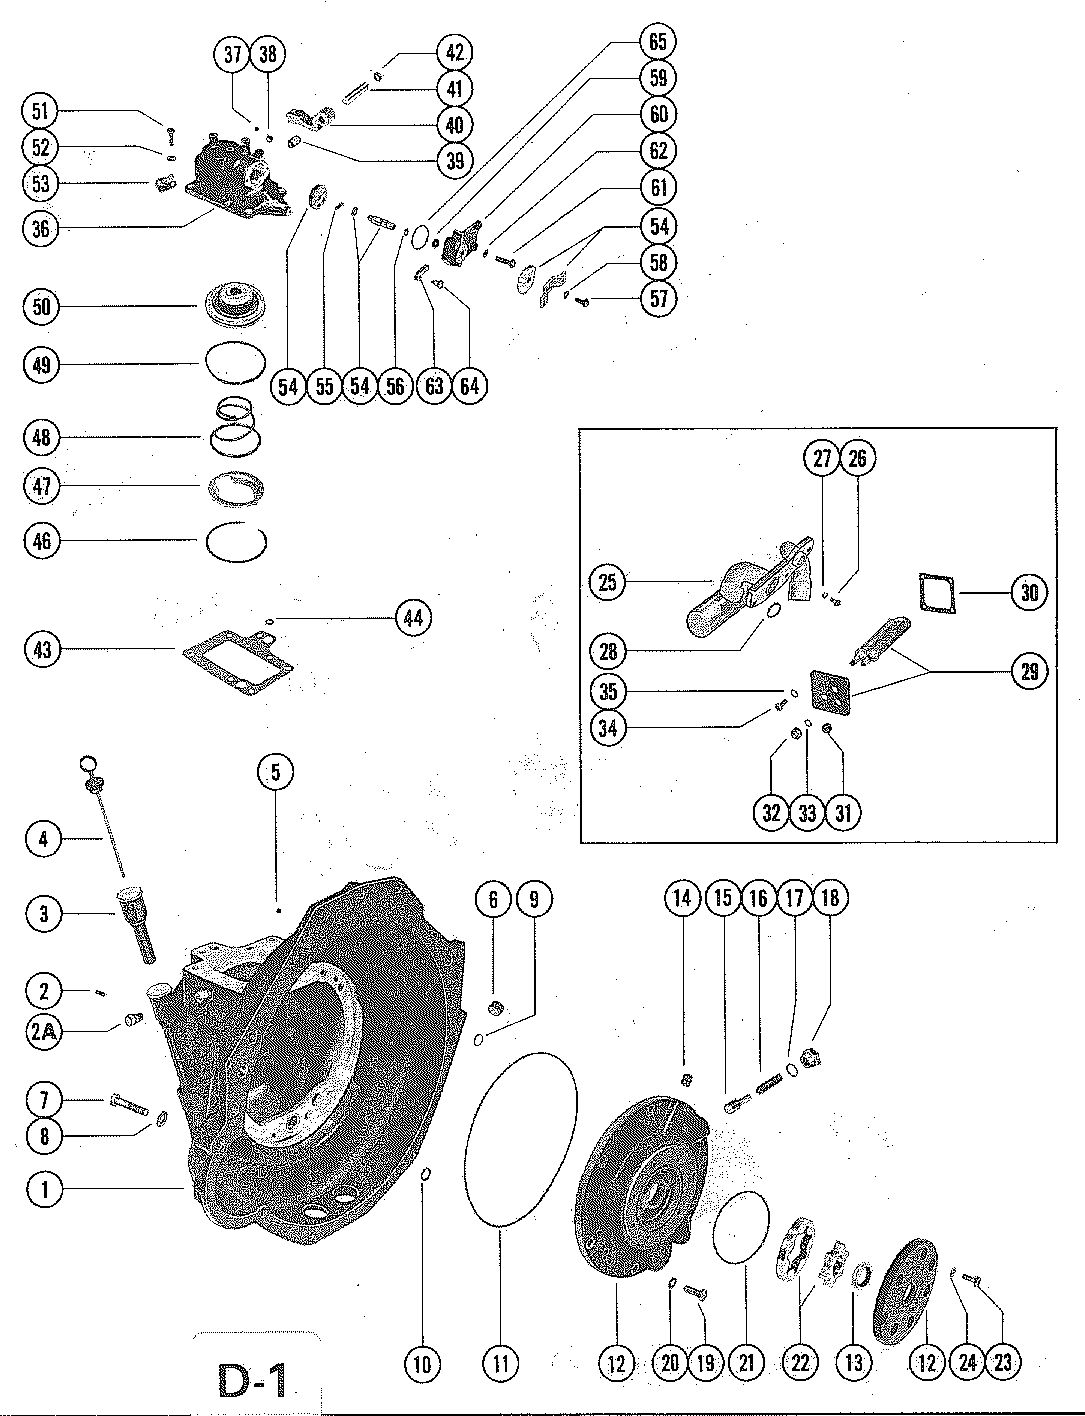 MERCRUISER 228 ENGINE (G.M.) TRANSMISSION ASSEMBLY (STERN DRIVE) PAGE 1